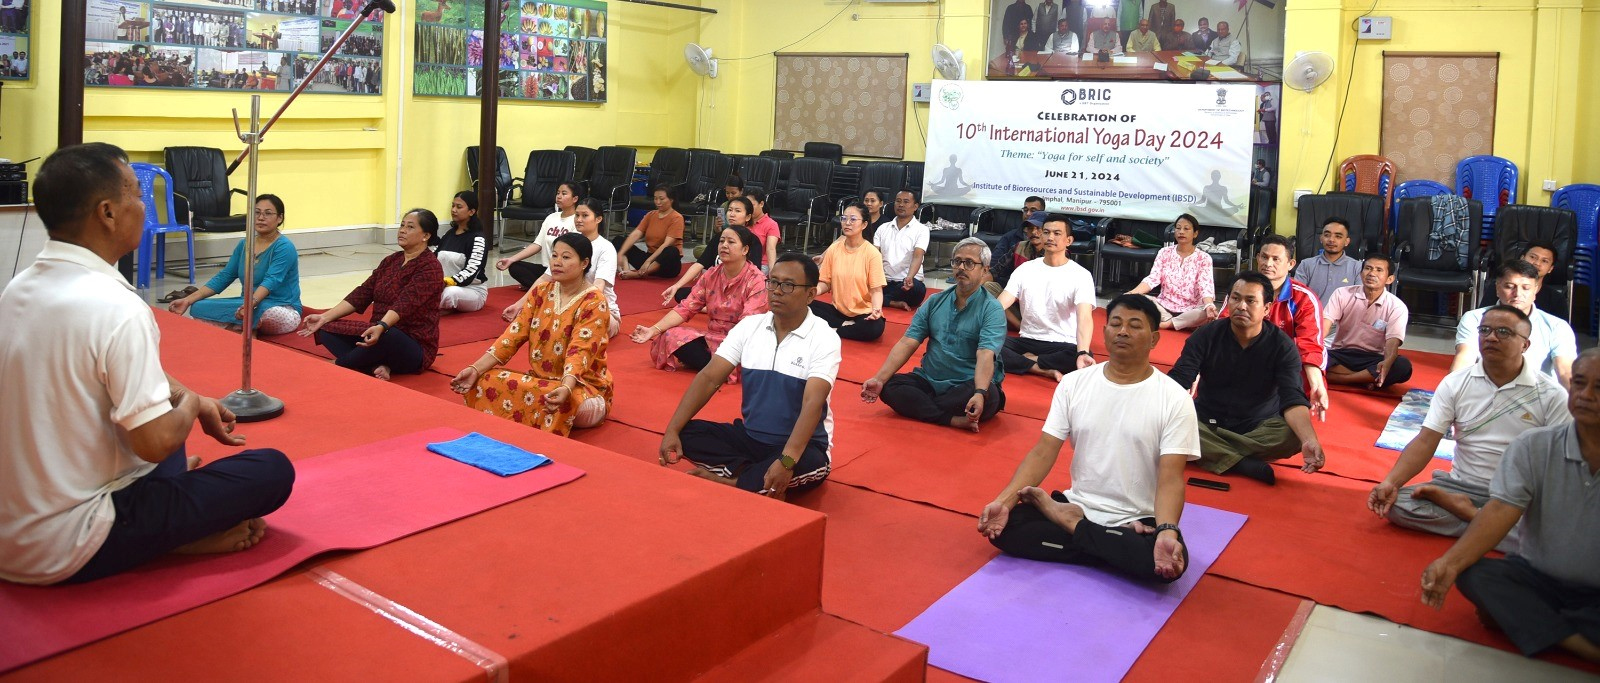 BRIC-IBSD under DBT, Govt. of India observed the International Yoga Day 2024 at Imphal, Manipur and its Centres in NER including Meghalaya, Mizoram and Sikkim